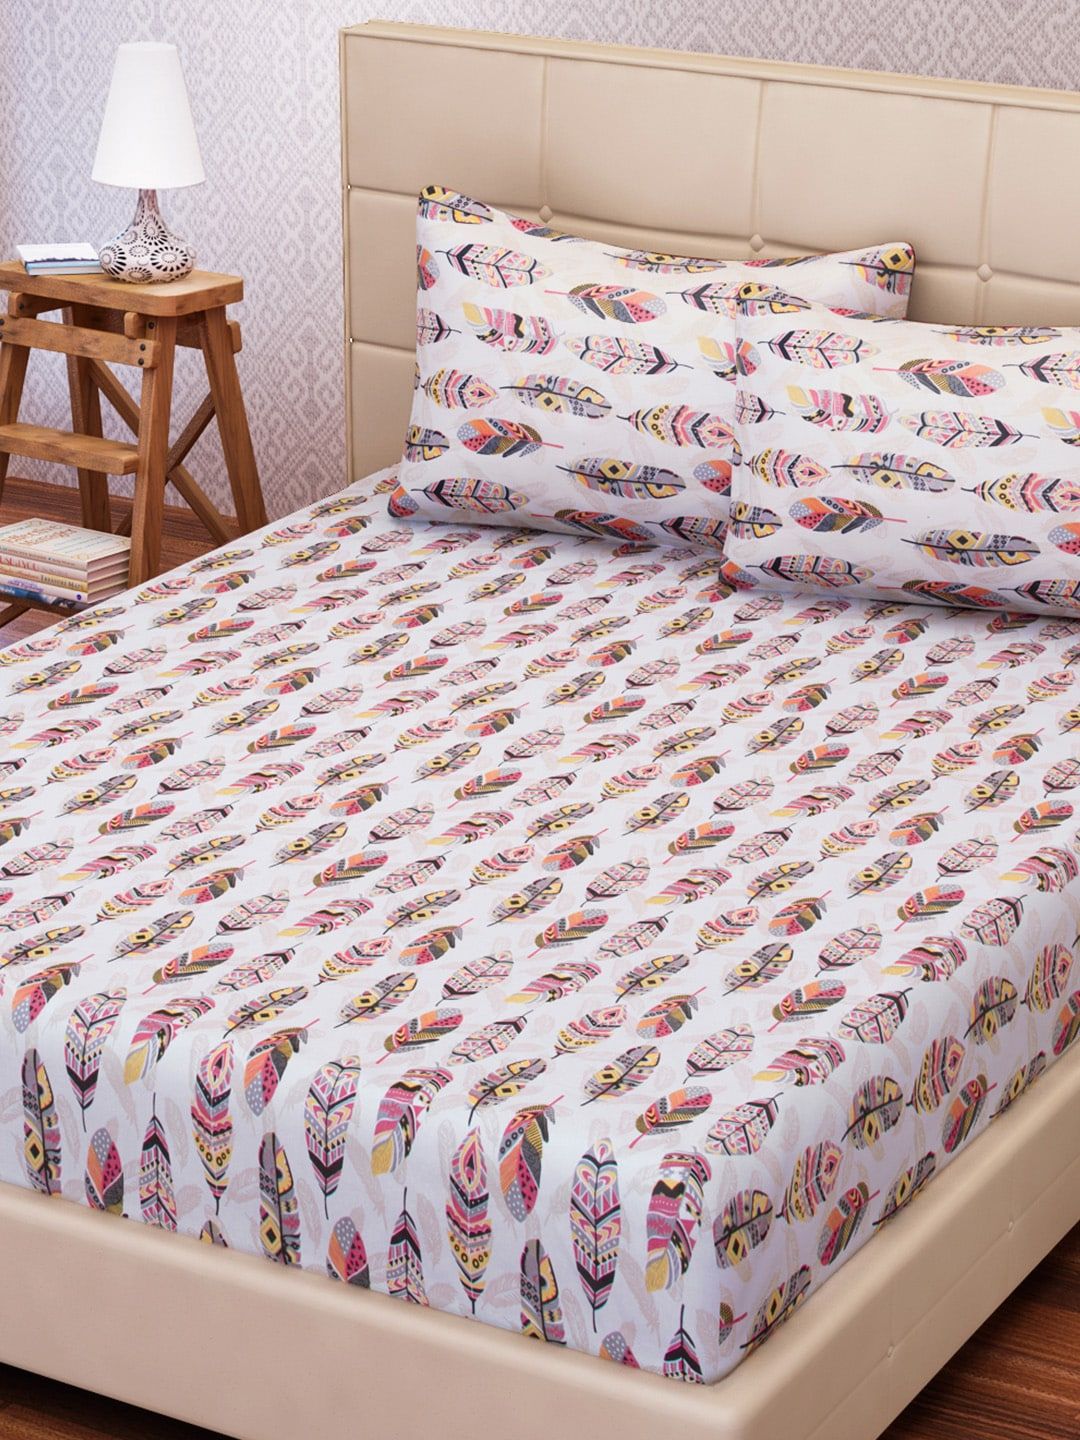 SEJ by Nisha Gupta White & Pink 144 TC Cotton King Bedsheet with 2 Pillow Covers Price in India